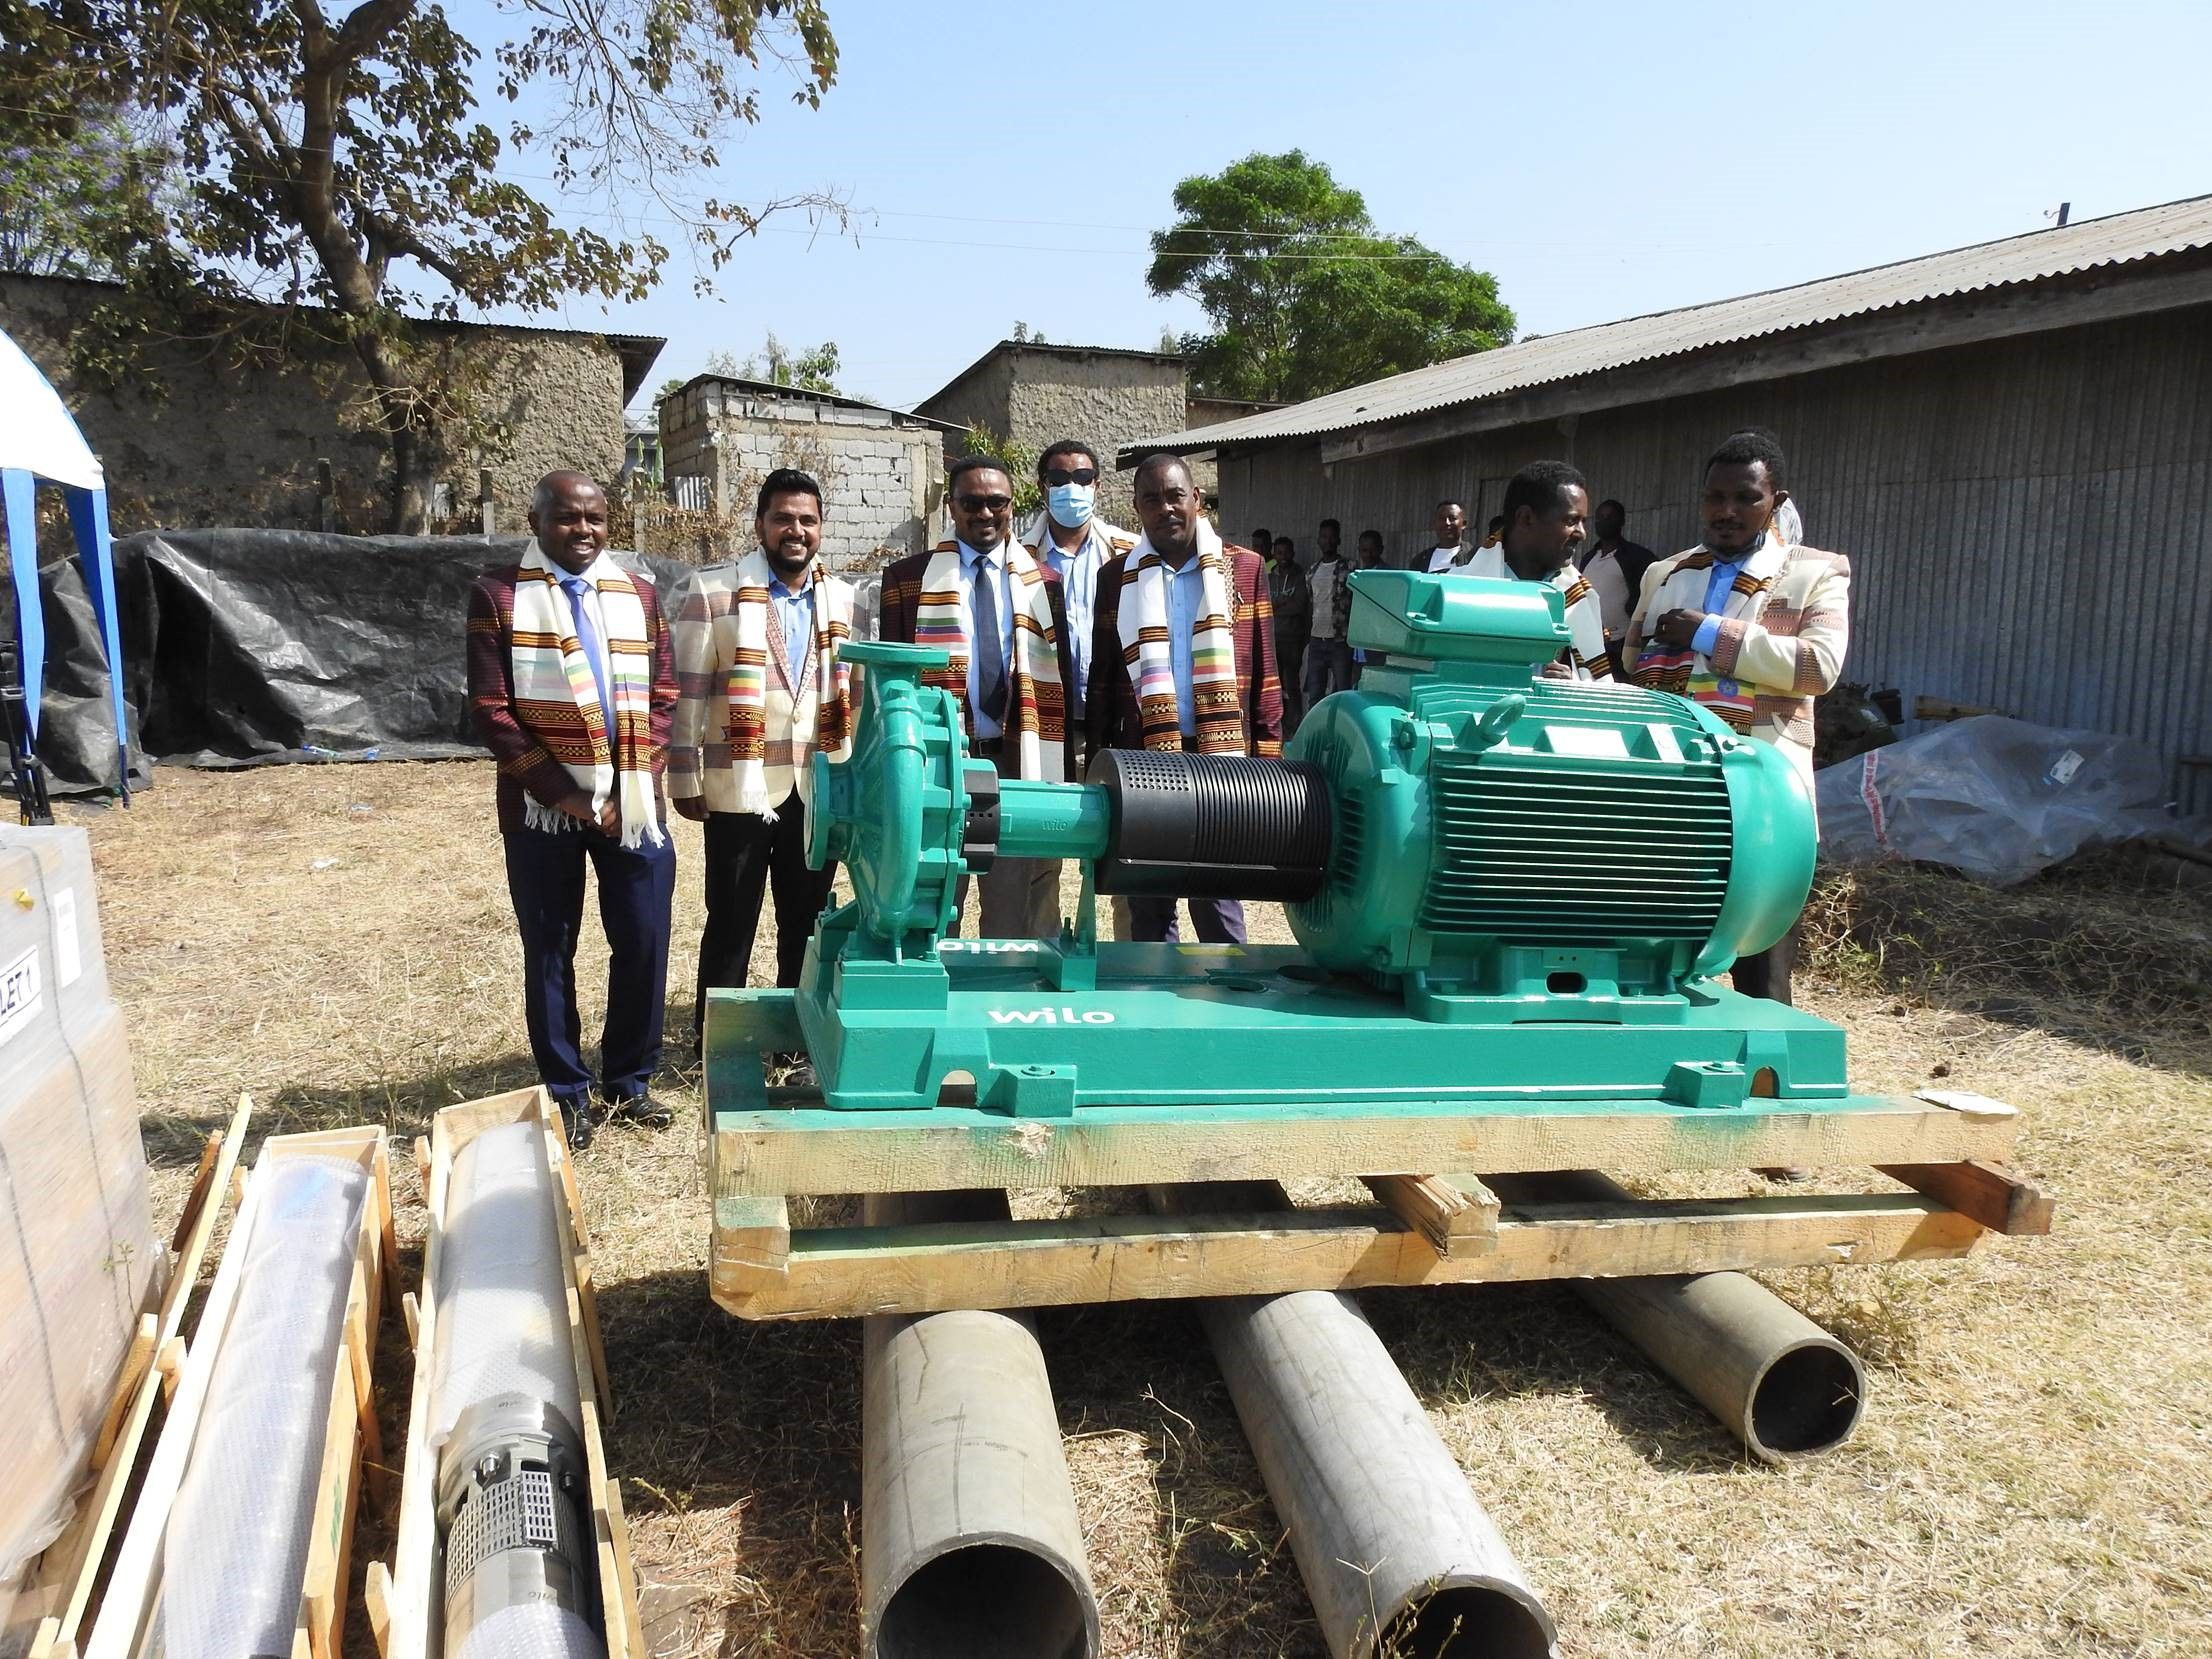 Representatives of NatuReS and PVH handing over the water pumps to HWSSSE Copyright: NatuReS Ethiopia